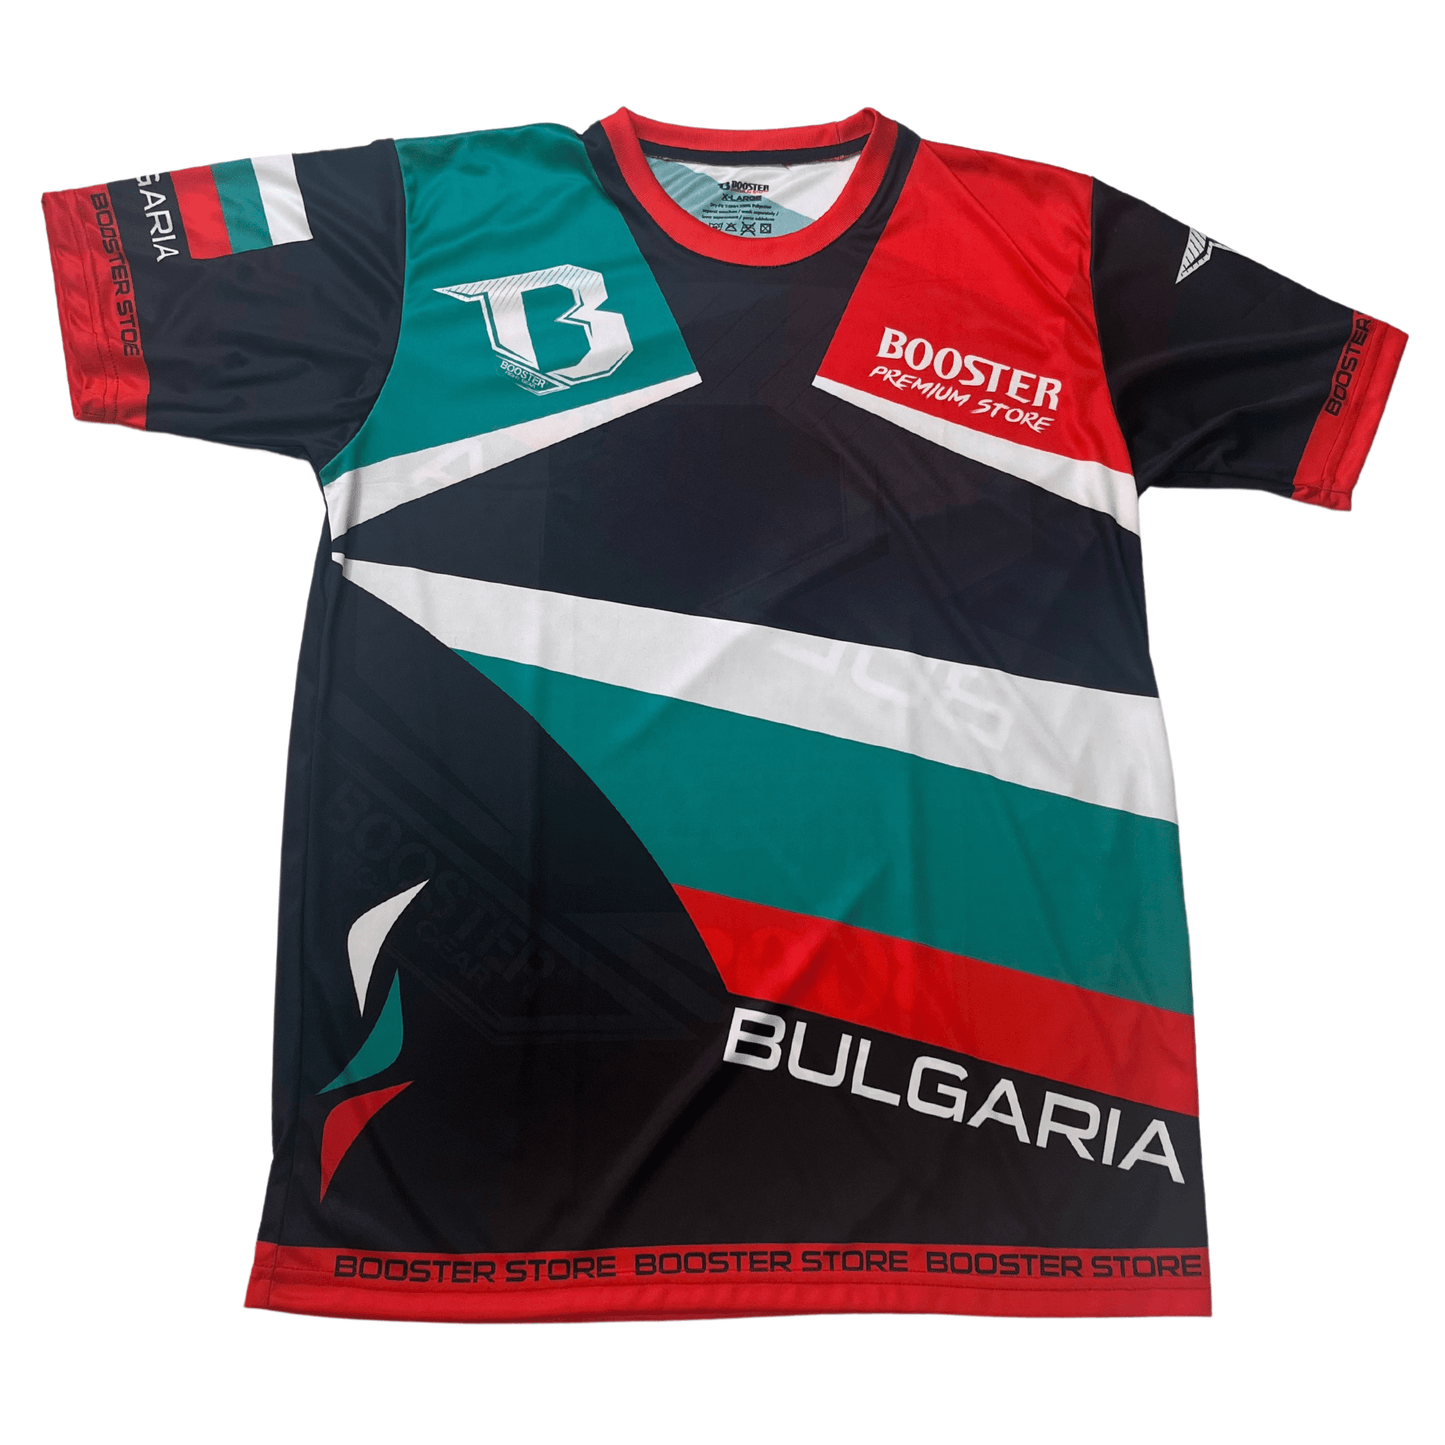 Bulgaria Booster Fight Shirt - Booster Fight Store